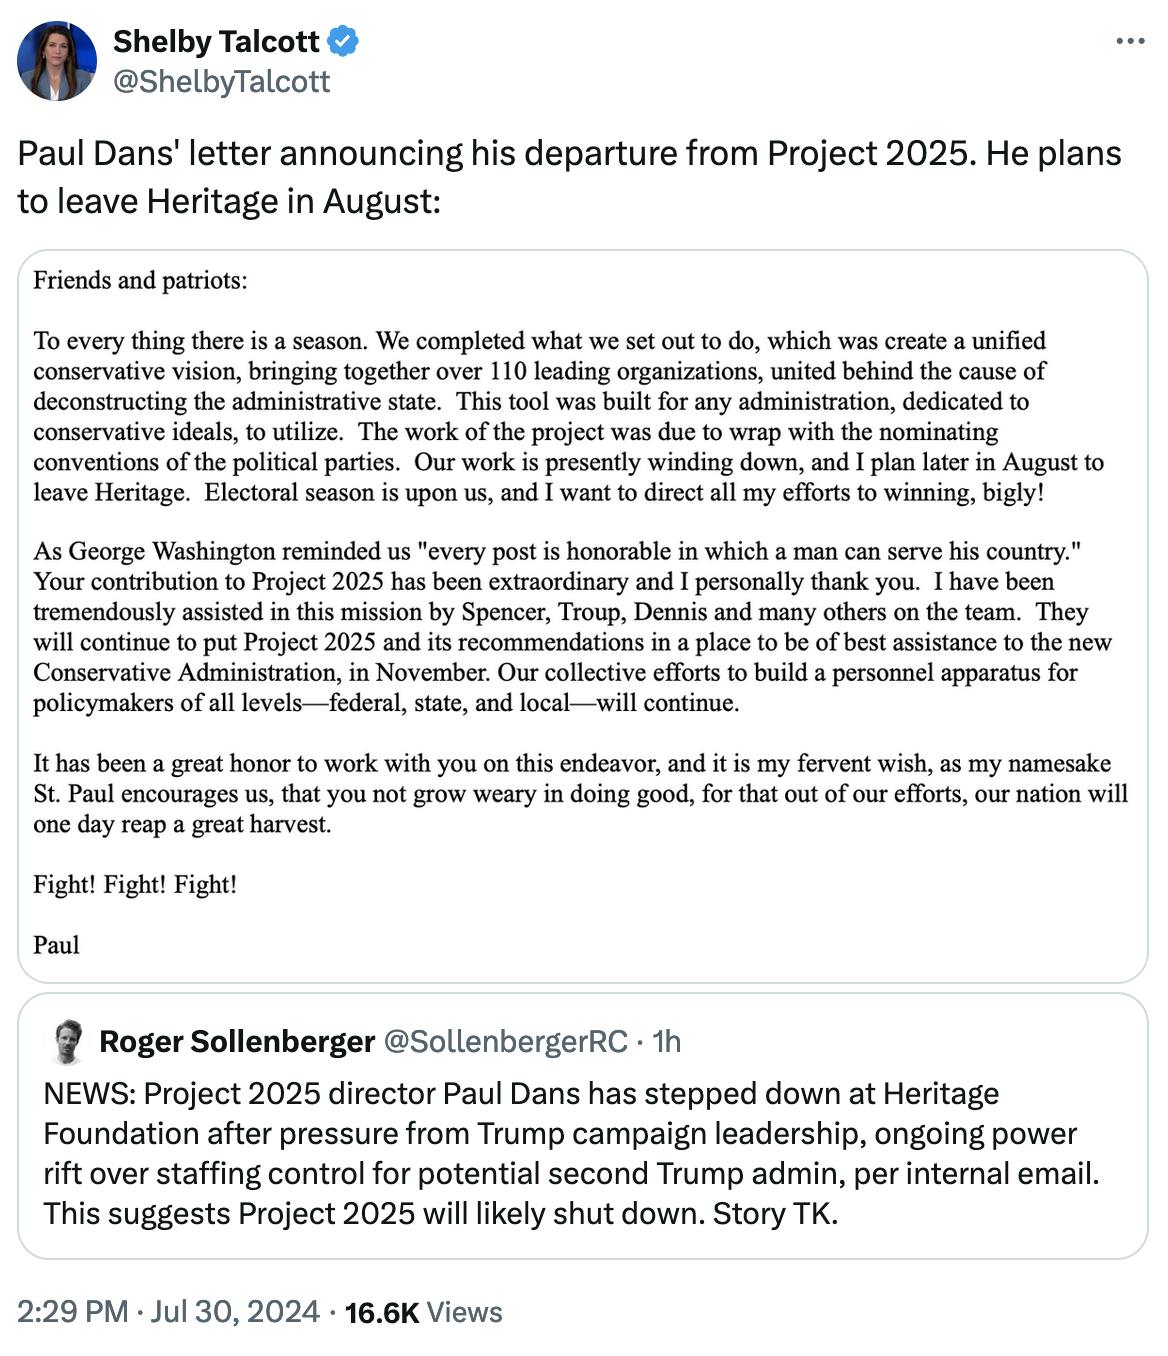 Twitter screenshot Shelby Talcott @ShelbyTalcott: Paul Dans' letter announcing his departure from Project 2025. He plans to leave Heritage in August: (screenshot of email)